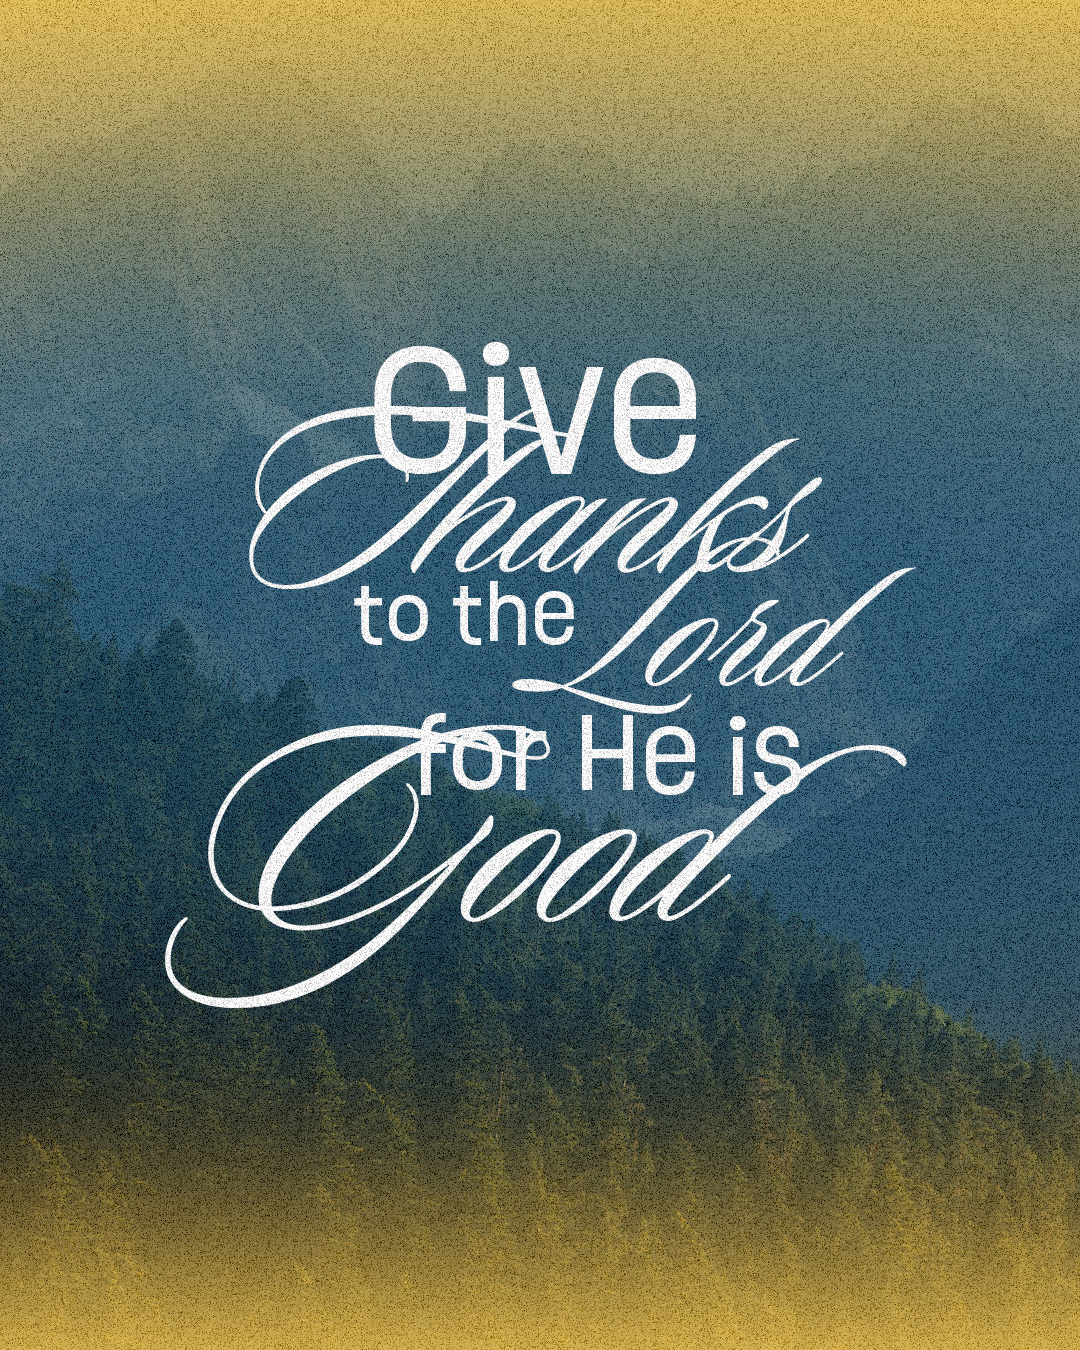 Give thanks to the Lord for He is good